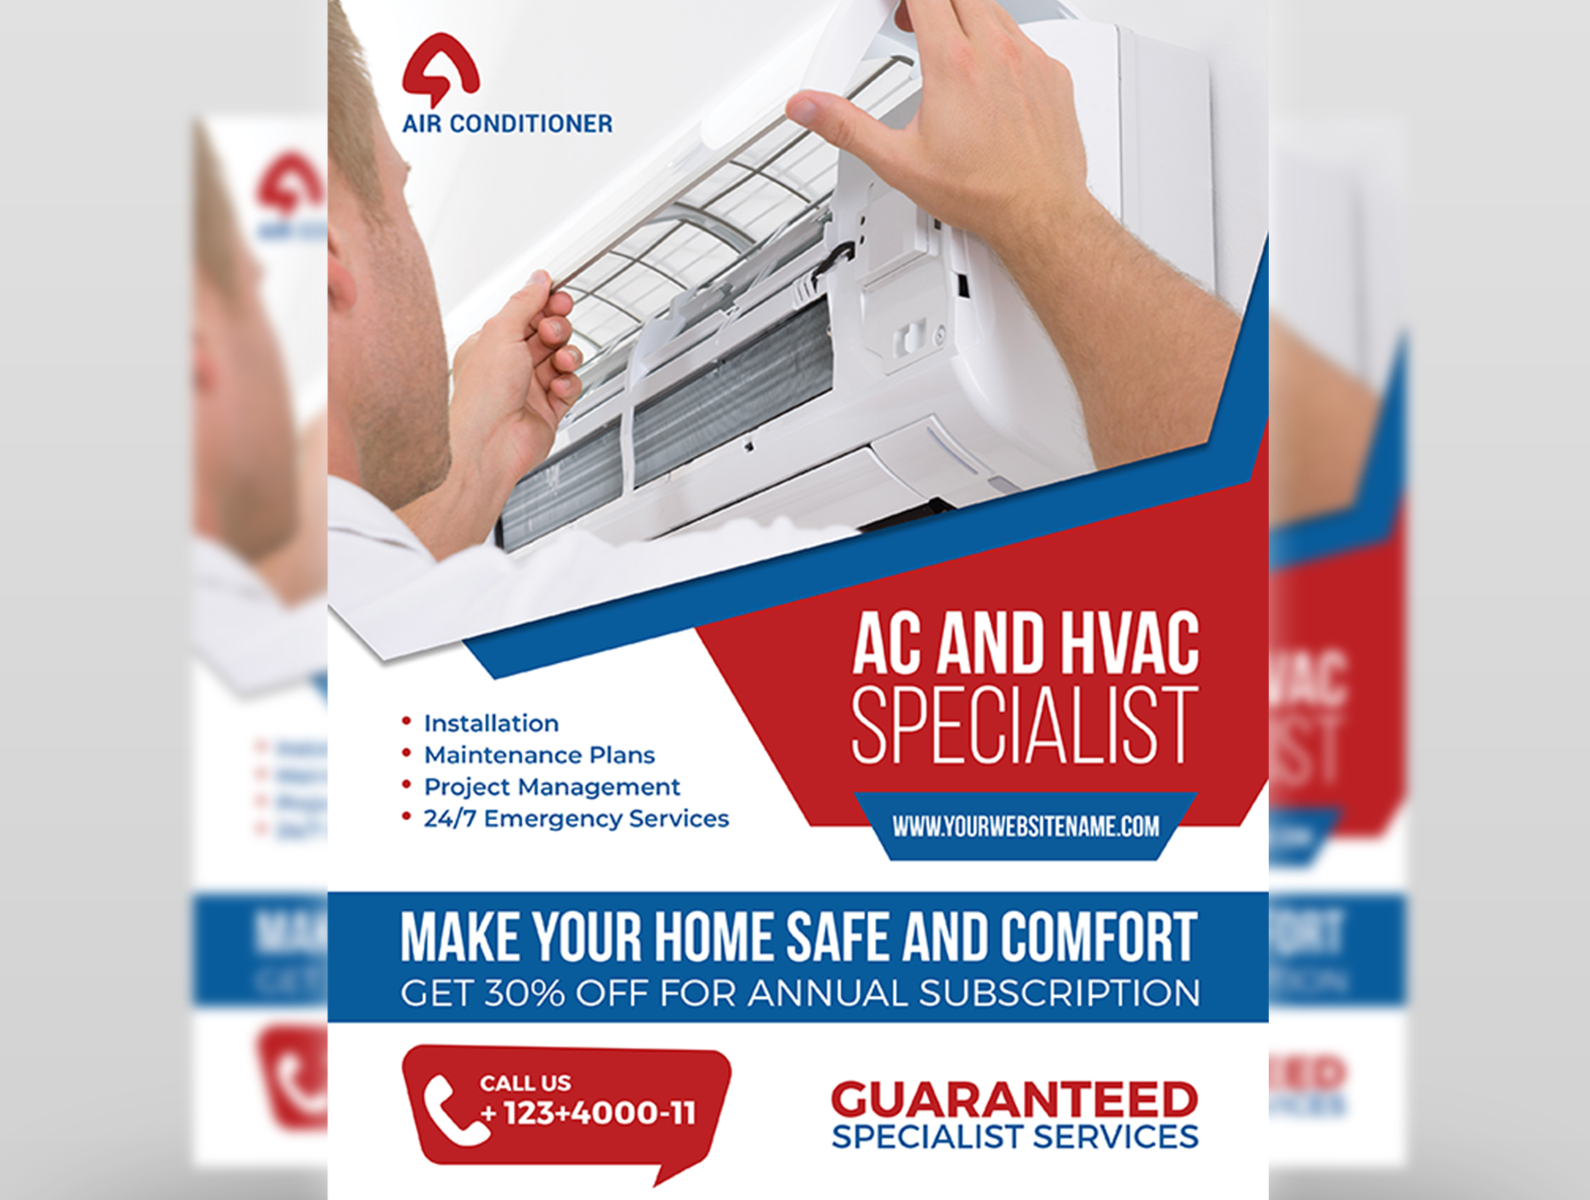 air-conditioner-repair-service-flyer-template-by-owpictures-on-dribbble